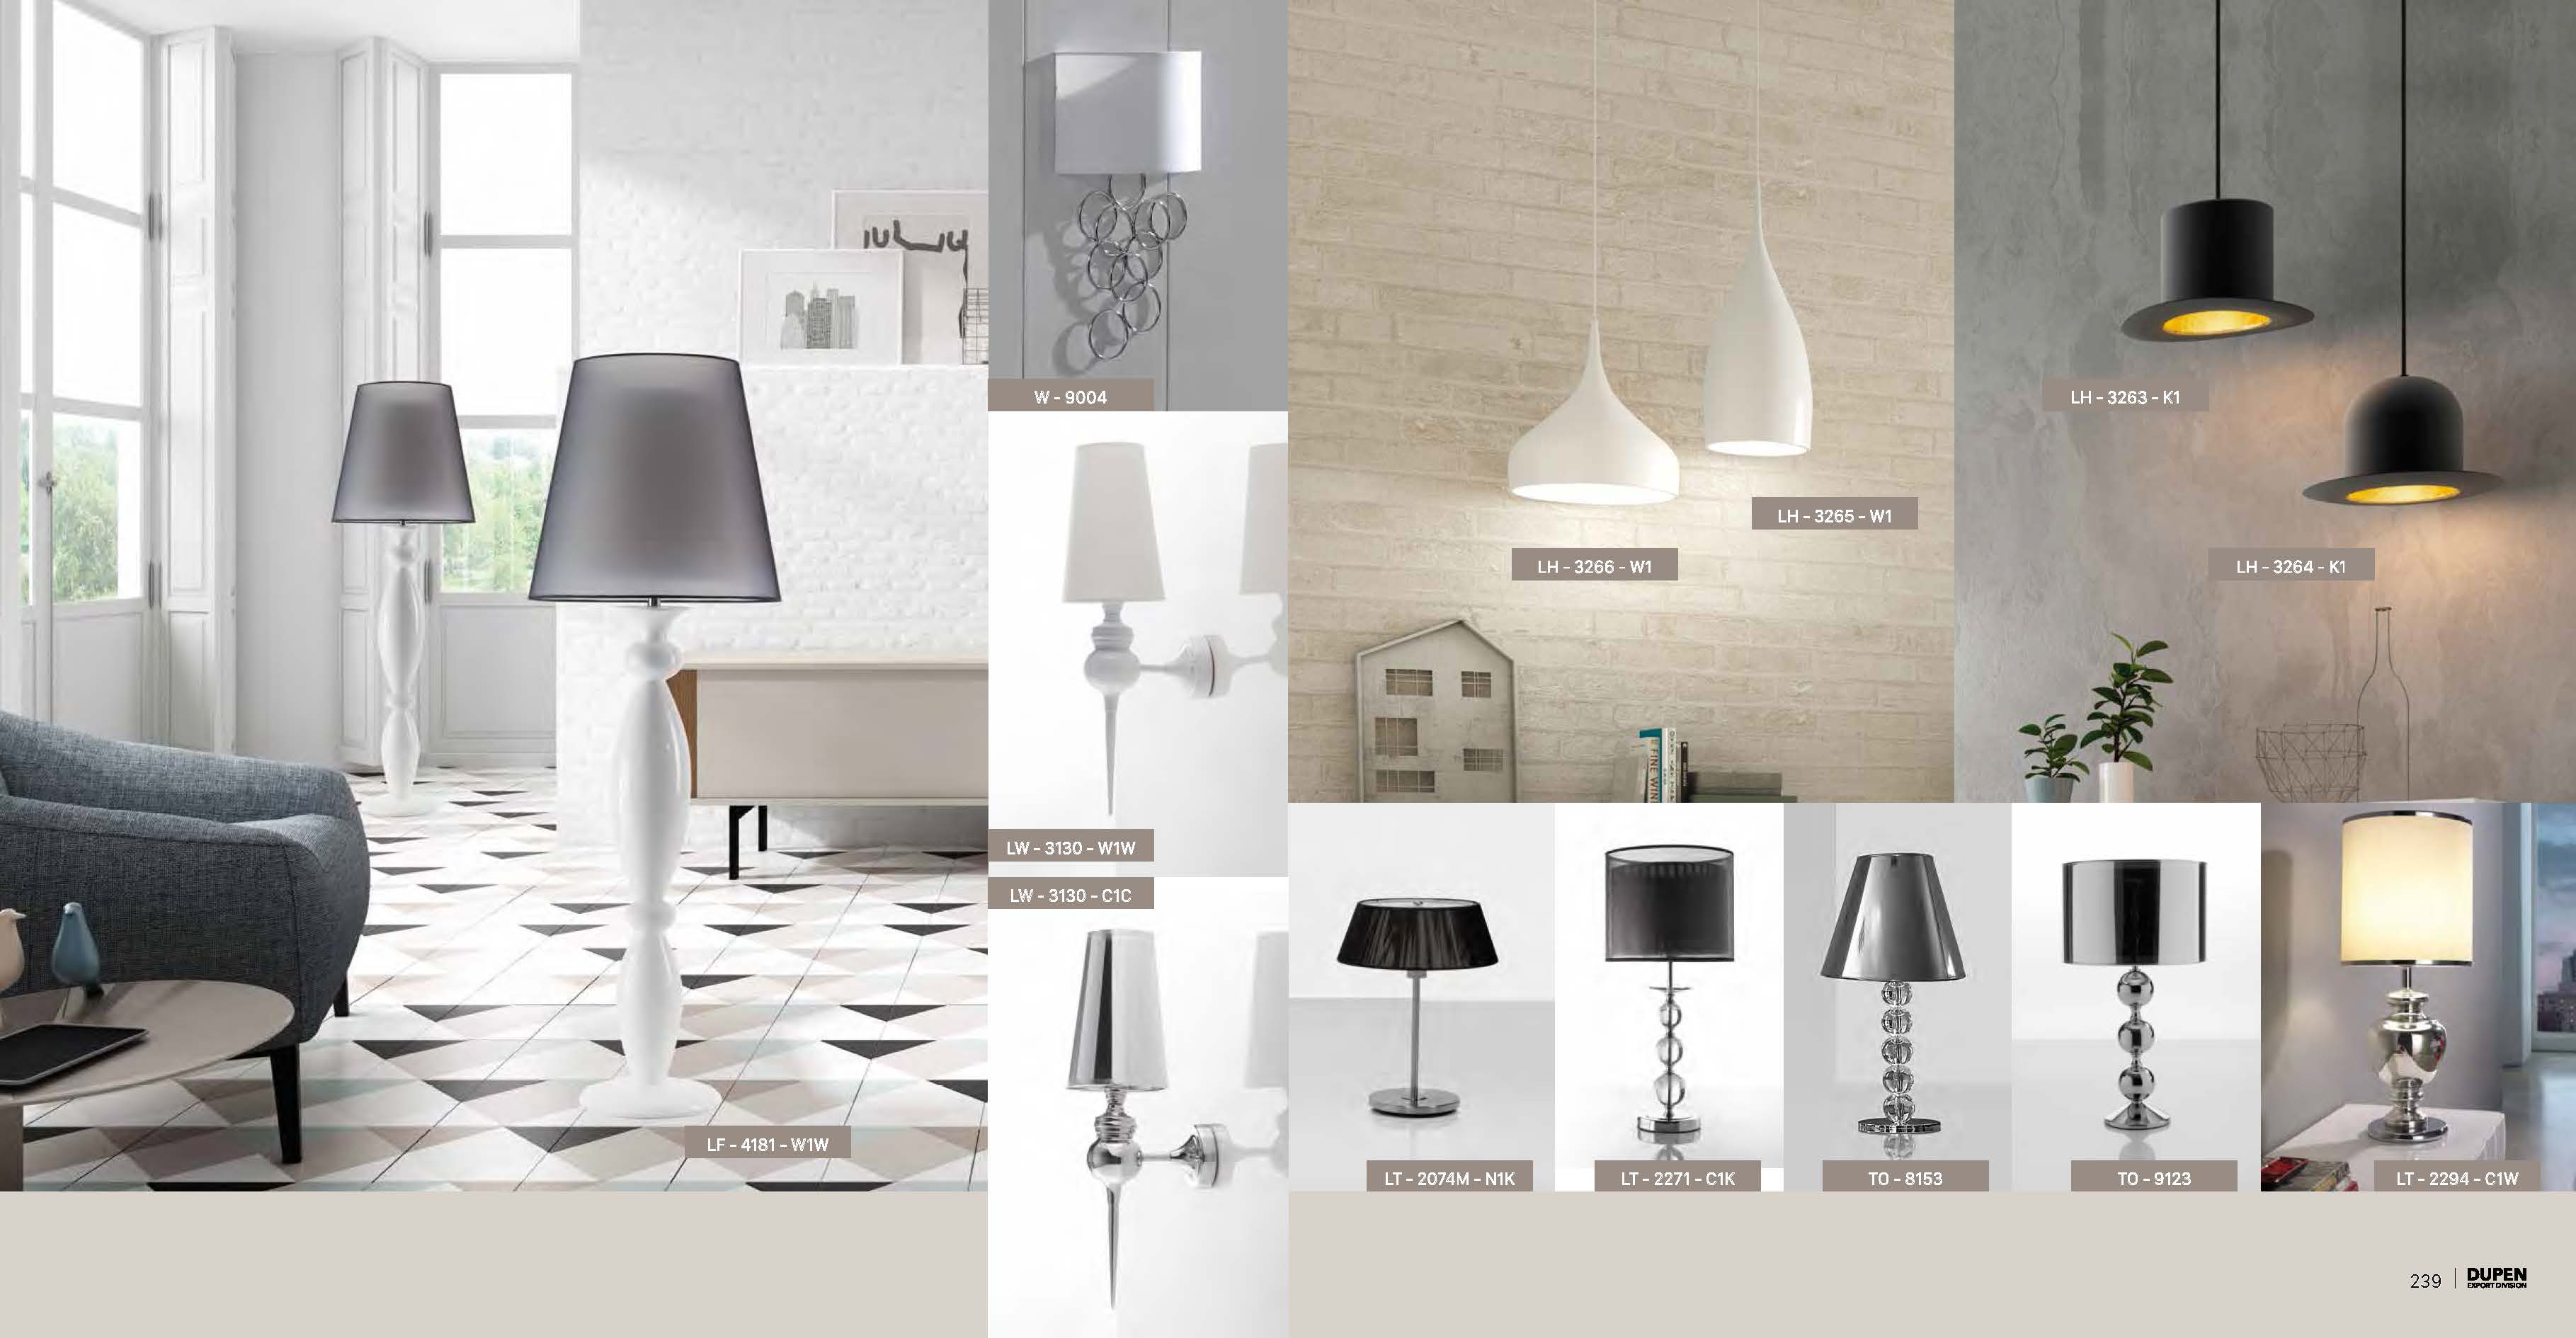 Brands Status Modern Collections, Italy LT-2271-C1K, TO-9123, LT-2294-C1W